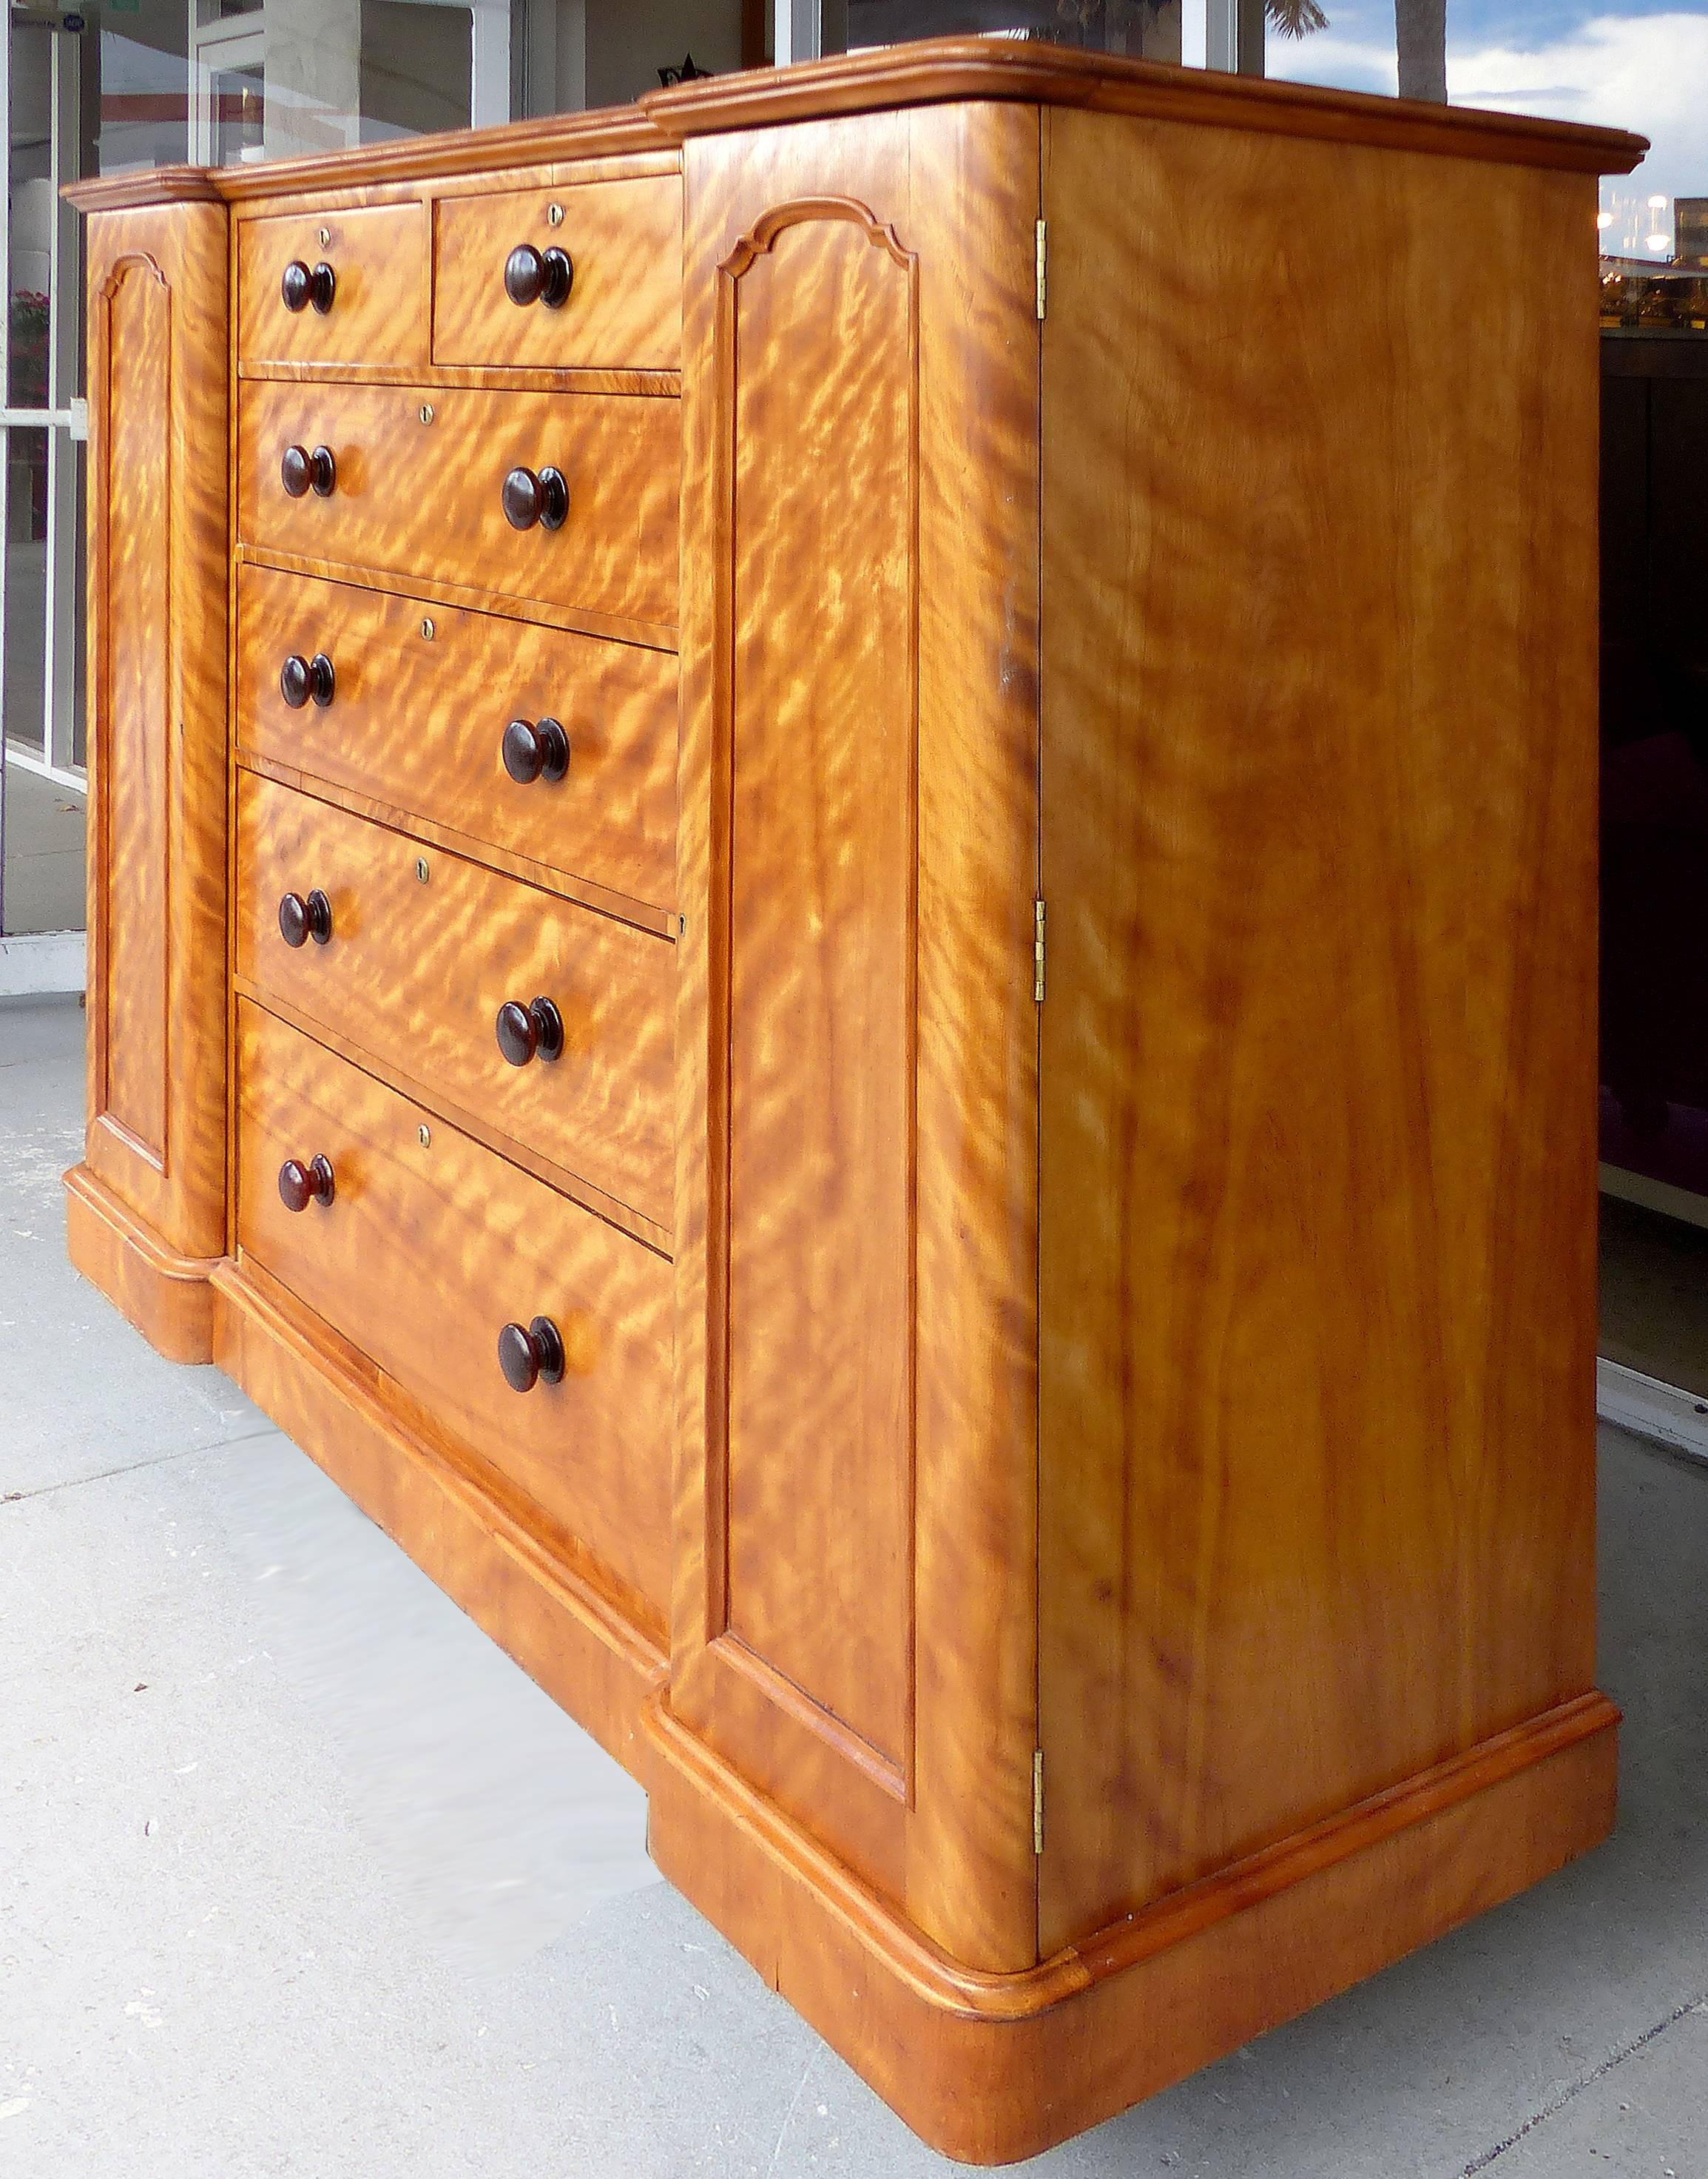 19th Century Tall Maple Biedermeier Dresser

A 19th century Biedermeier tall maple dresser with six drawers and two-side compartments. The finish is vibrant and accented by dark turned wood knobs. The cabinet does show wear and minor losses